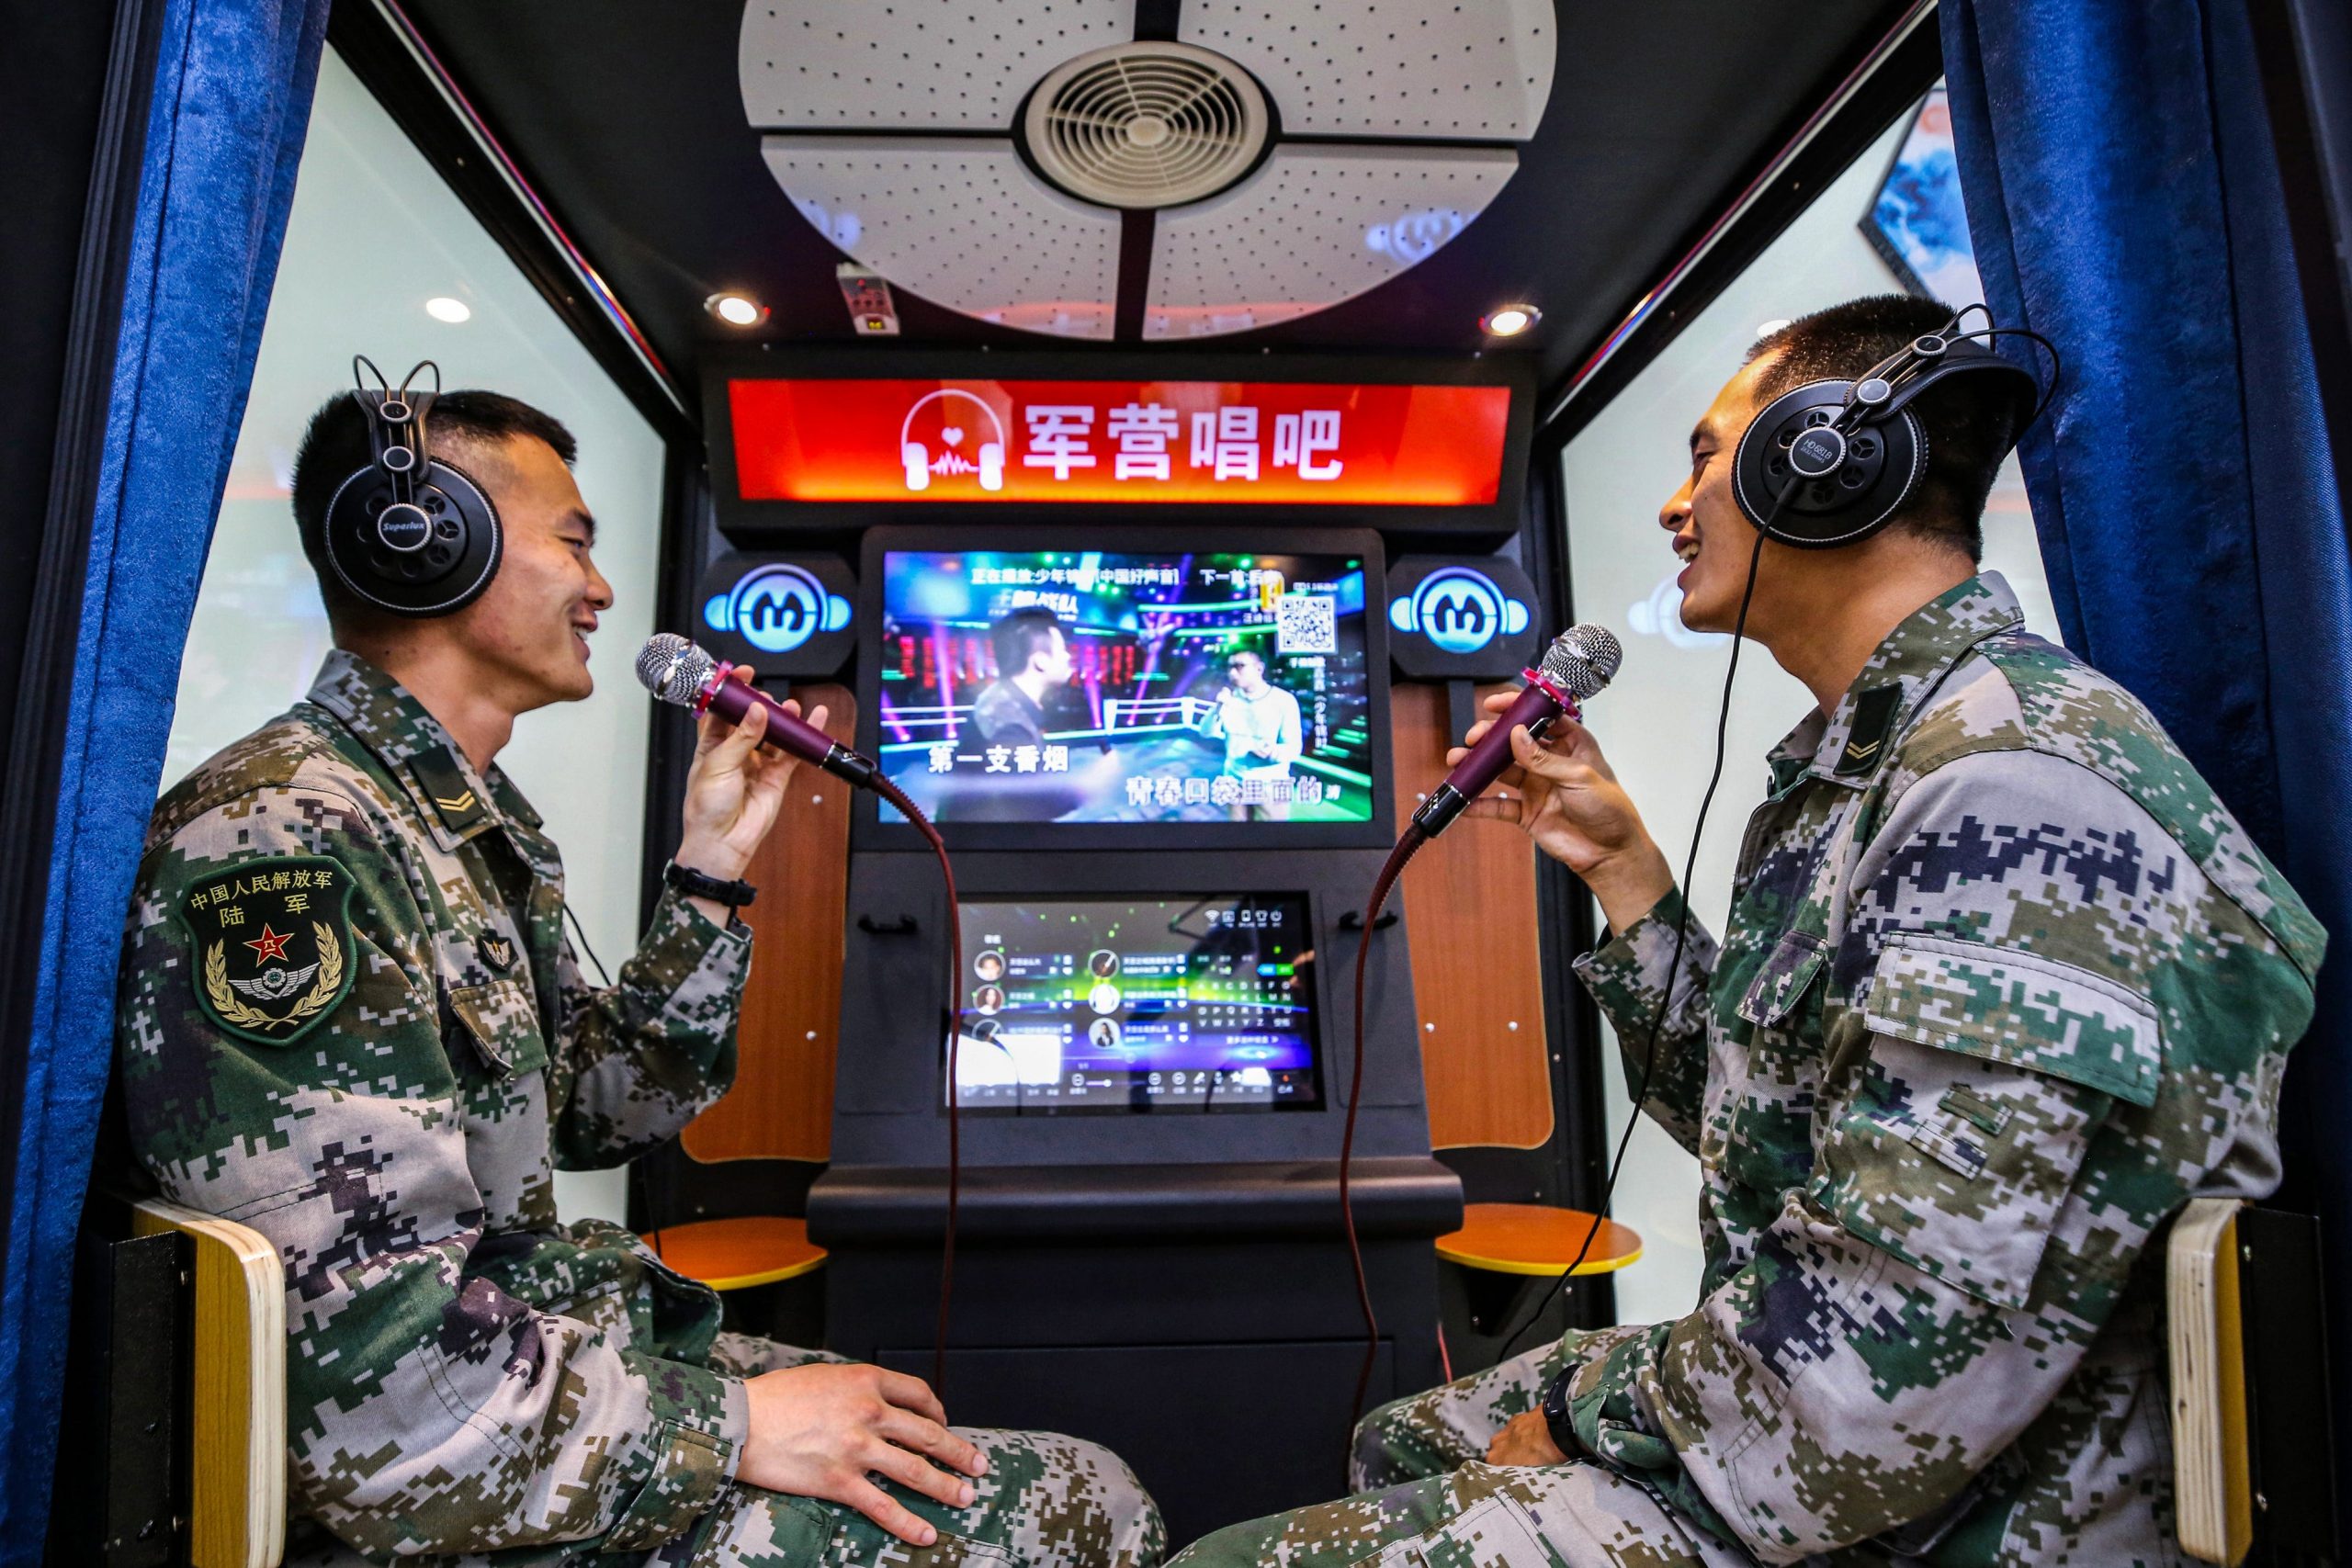 Chinese soldiers singing at a karaoke booth at a military barracks in Jiangsu Province.